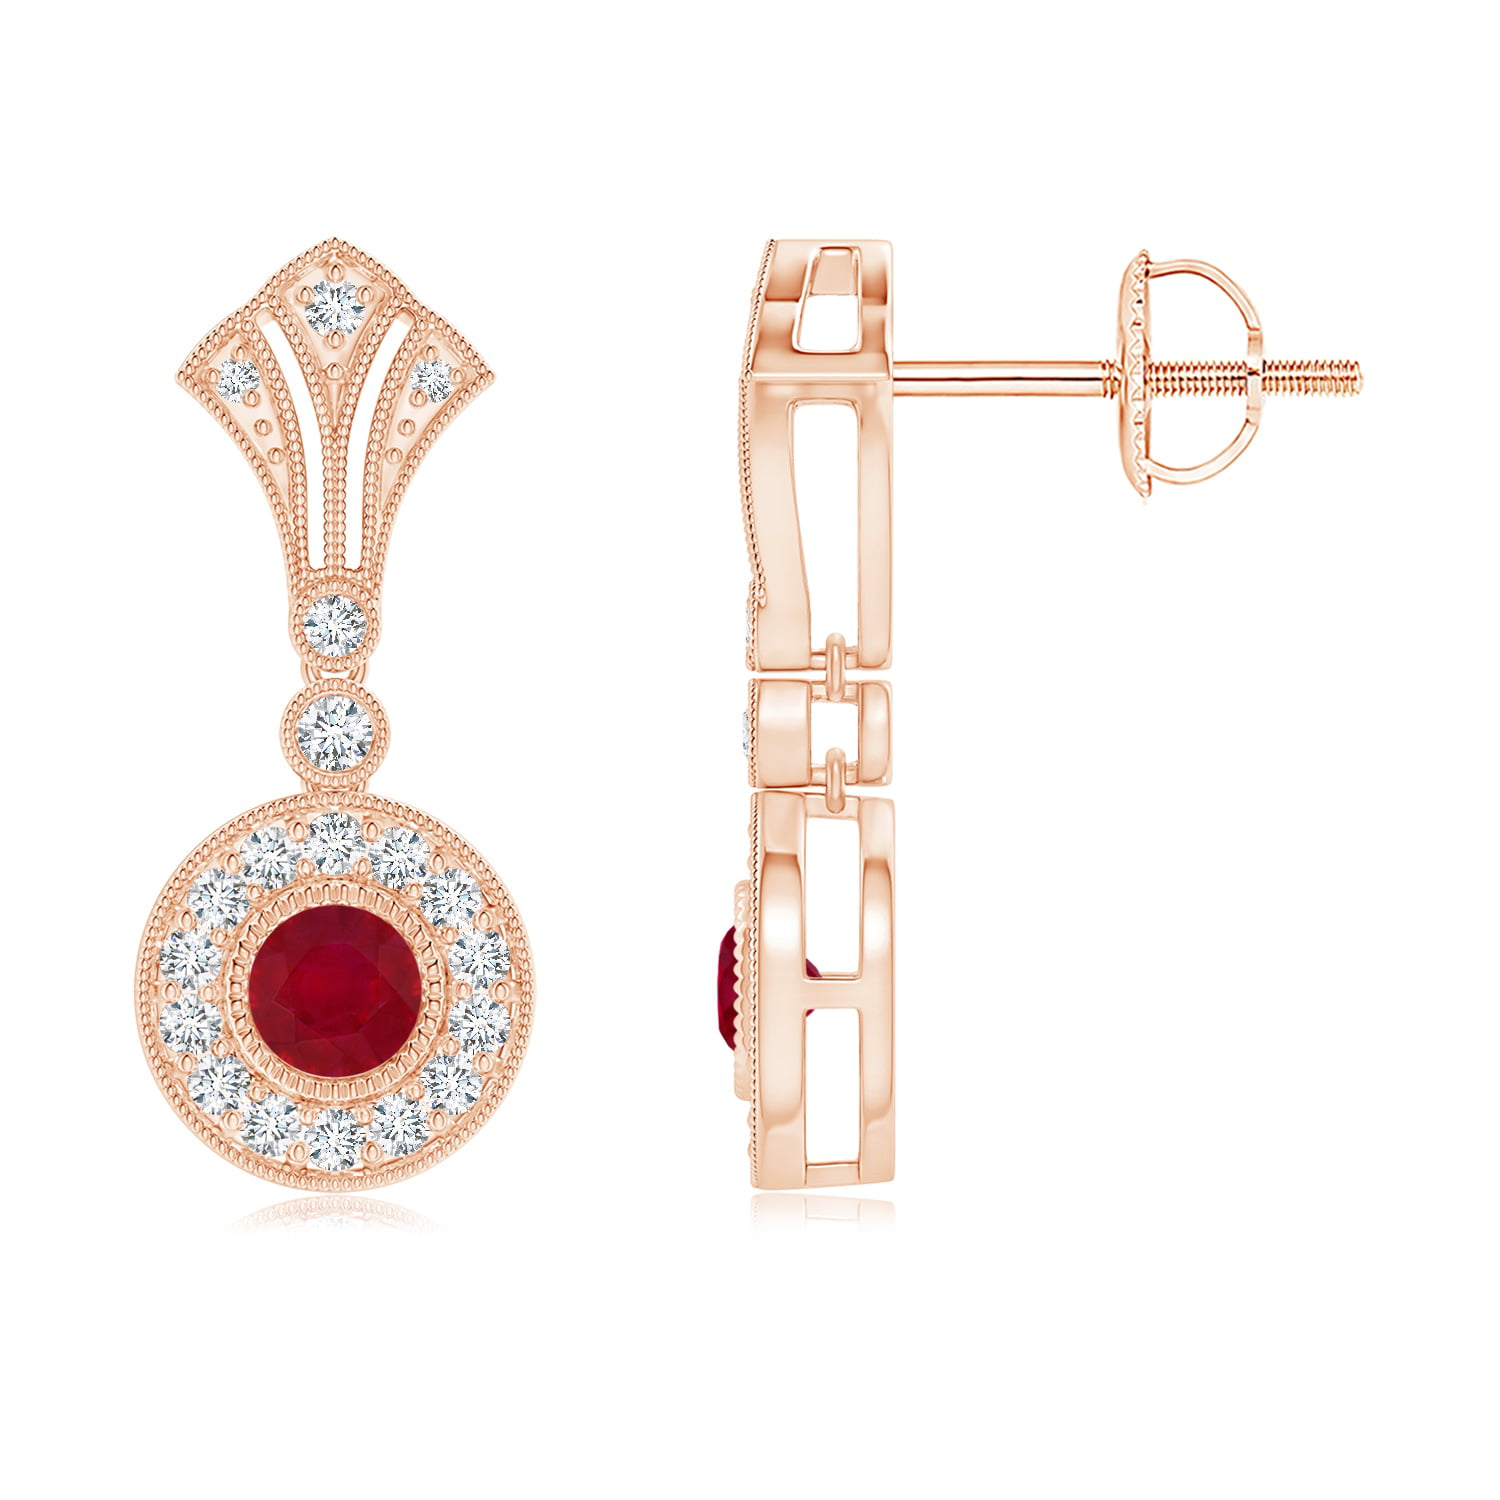 Details about   1CT Round Red Ruby CZ Halo Star Earrings Women Jewelry Gift 14K Rose Gold Plated